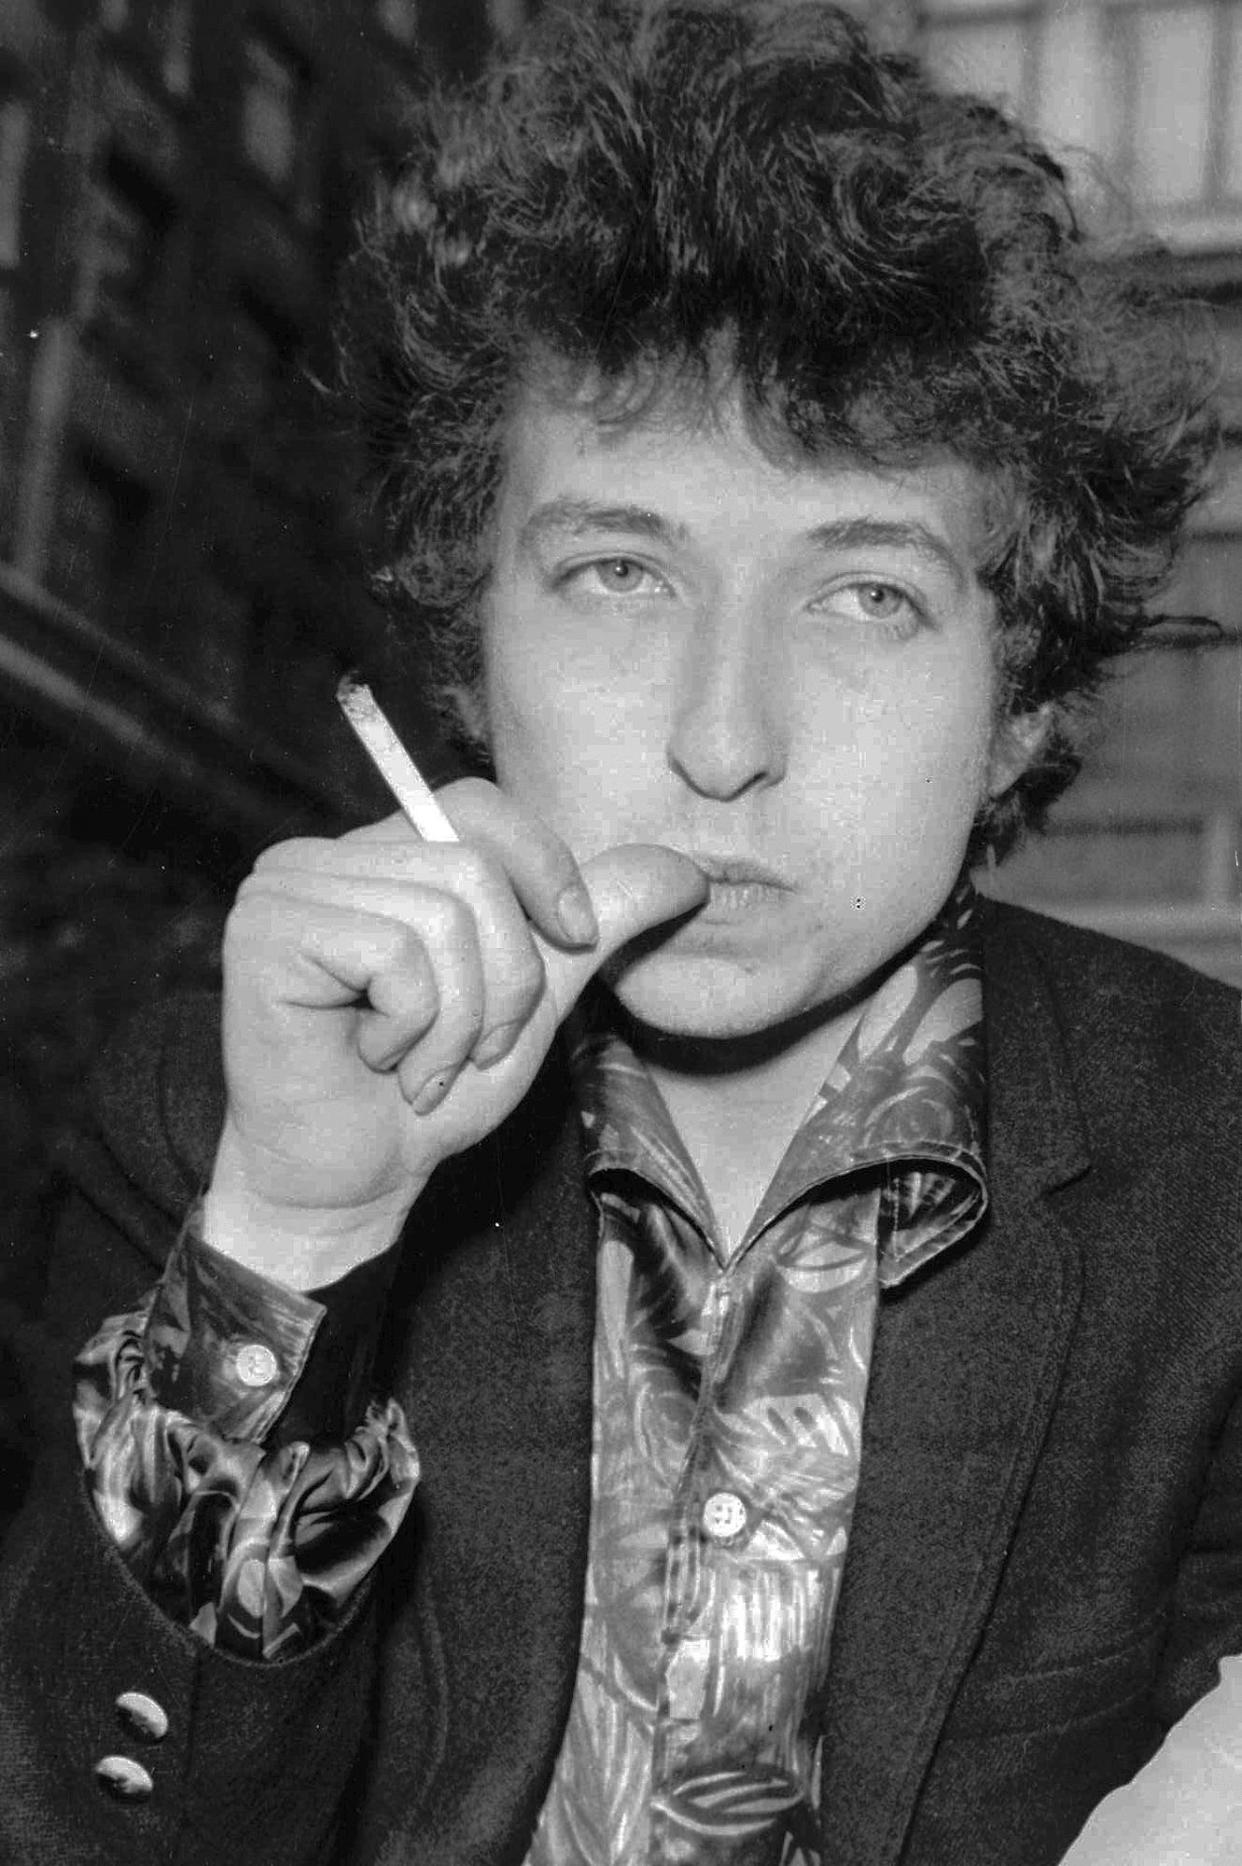 FILE - Musician Bob Dylan appears in London on April 27, 1965. Transcripts of lost 1971 Dylan interviews with the late American blues artist Tony Glover and letters the two exchanged reveal that Dylan changed his name from Robert Zimmerman because he worried about anti-Semitism, and that he wrote "Lay Lady Lay" for actress Barbra Streisand. The items are among a trove of Dylan archives being auctioned in November 2020, by Boston-based R.R. Auction.